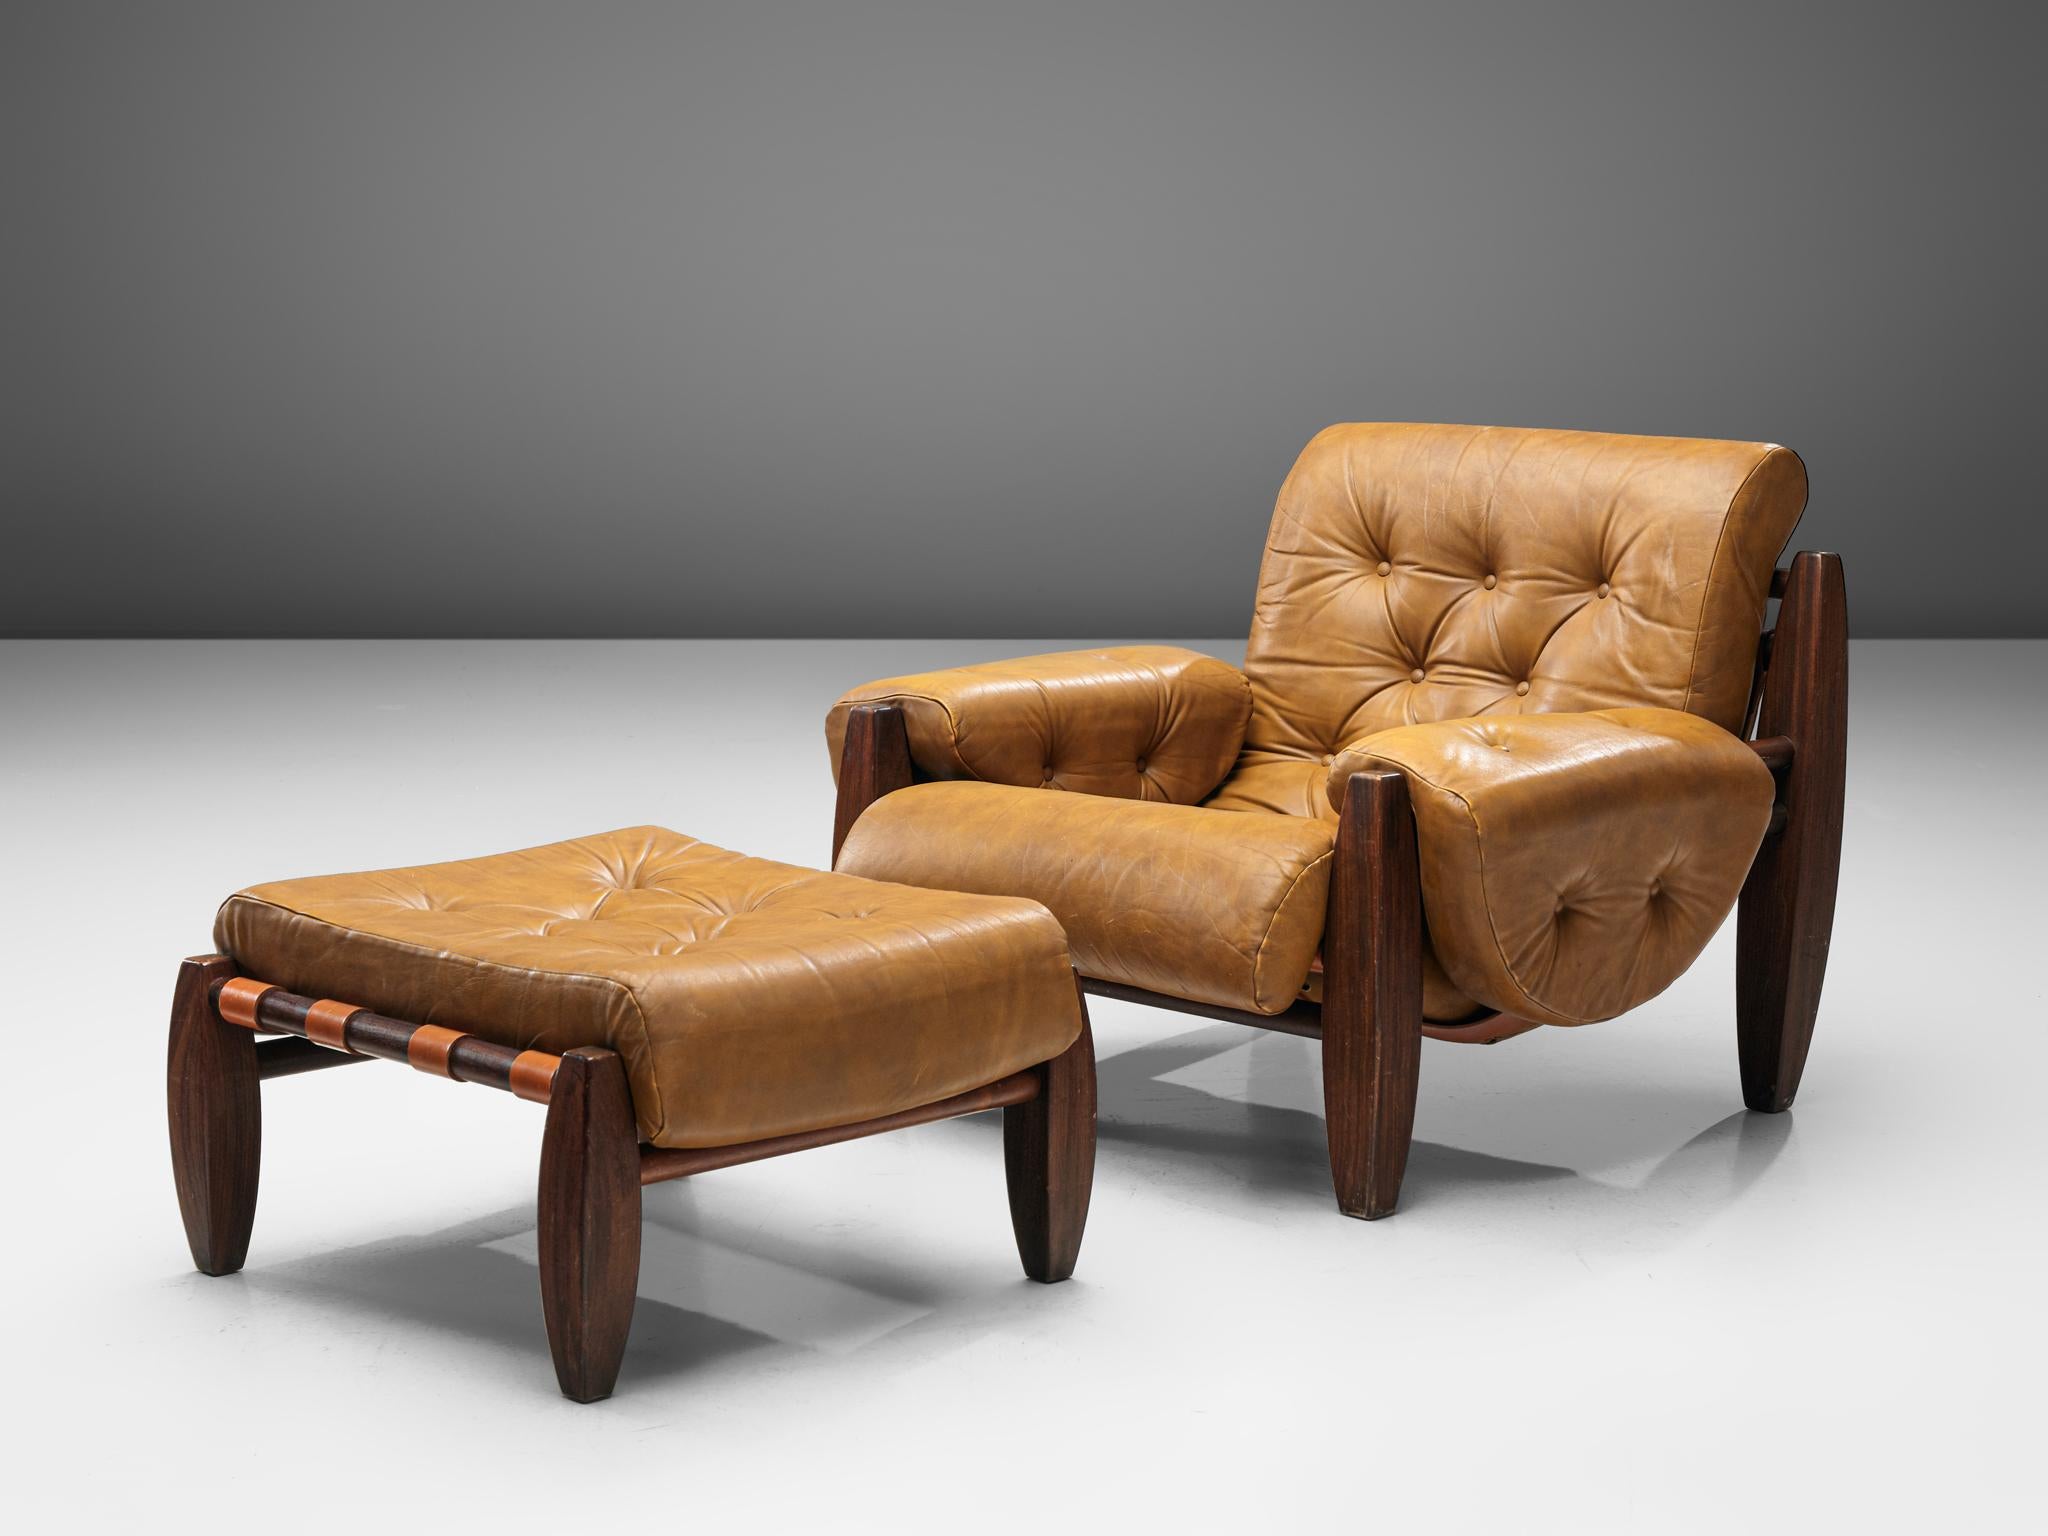 Lounge chair with ottoman, leather and Brazilian hardwood, Brazil, 1970s

A bulky lounge chair with ottoman that contains the characteristics of Brazilian modern furniture design. Made of traditional materials such us solid Brazilian wood. The